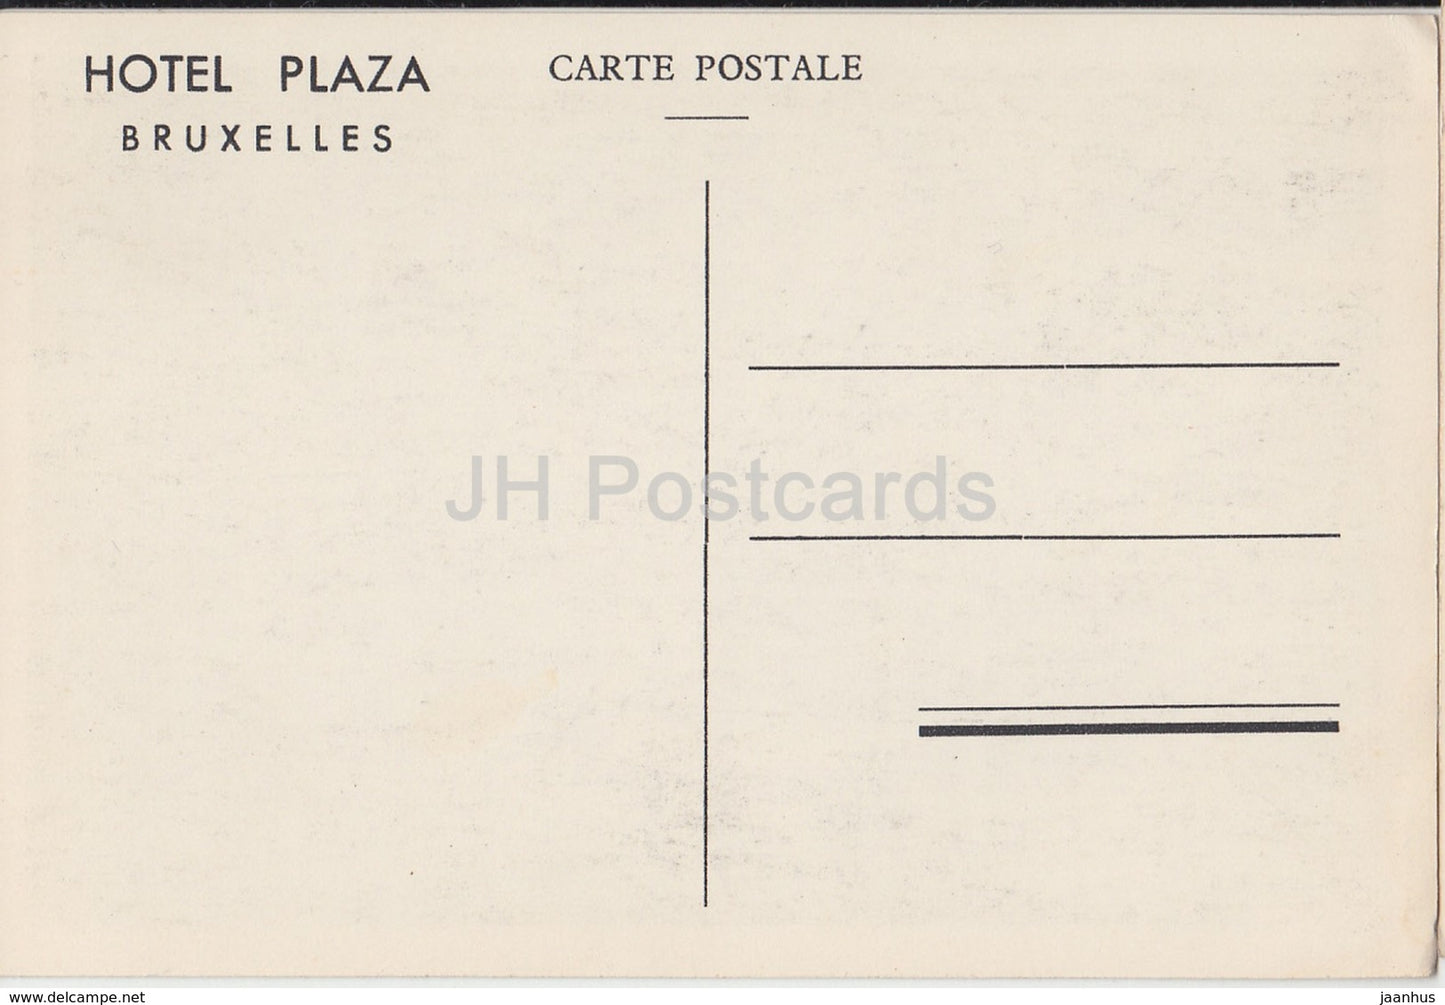 Brussels - Bruxelles - Hotel Plaza - S.A.B.E.P.A. - old postcard - Belgium - unused